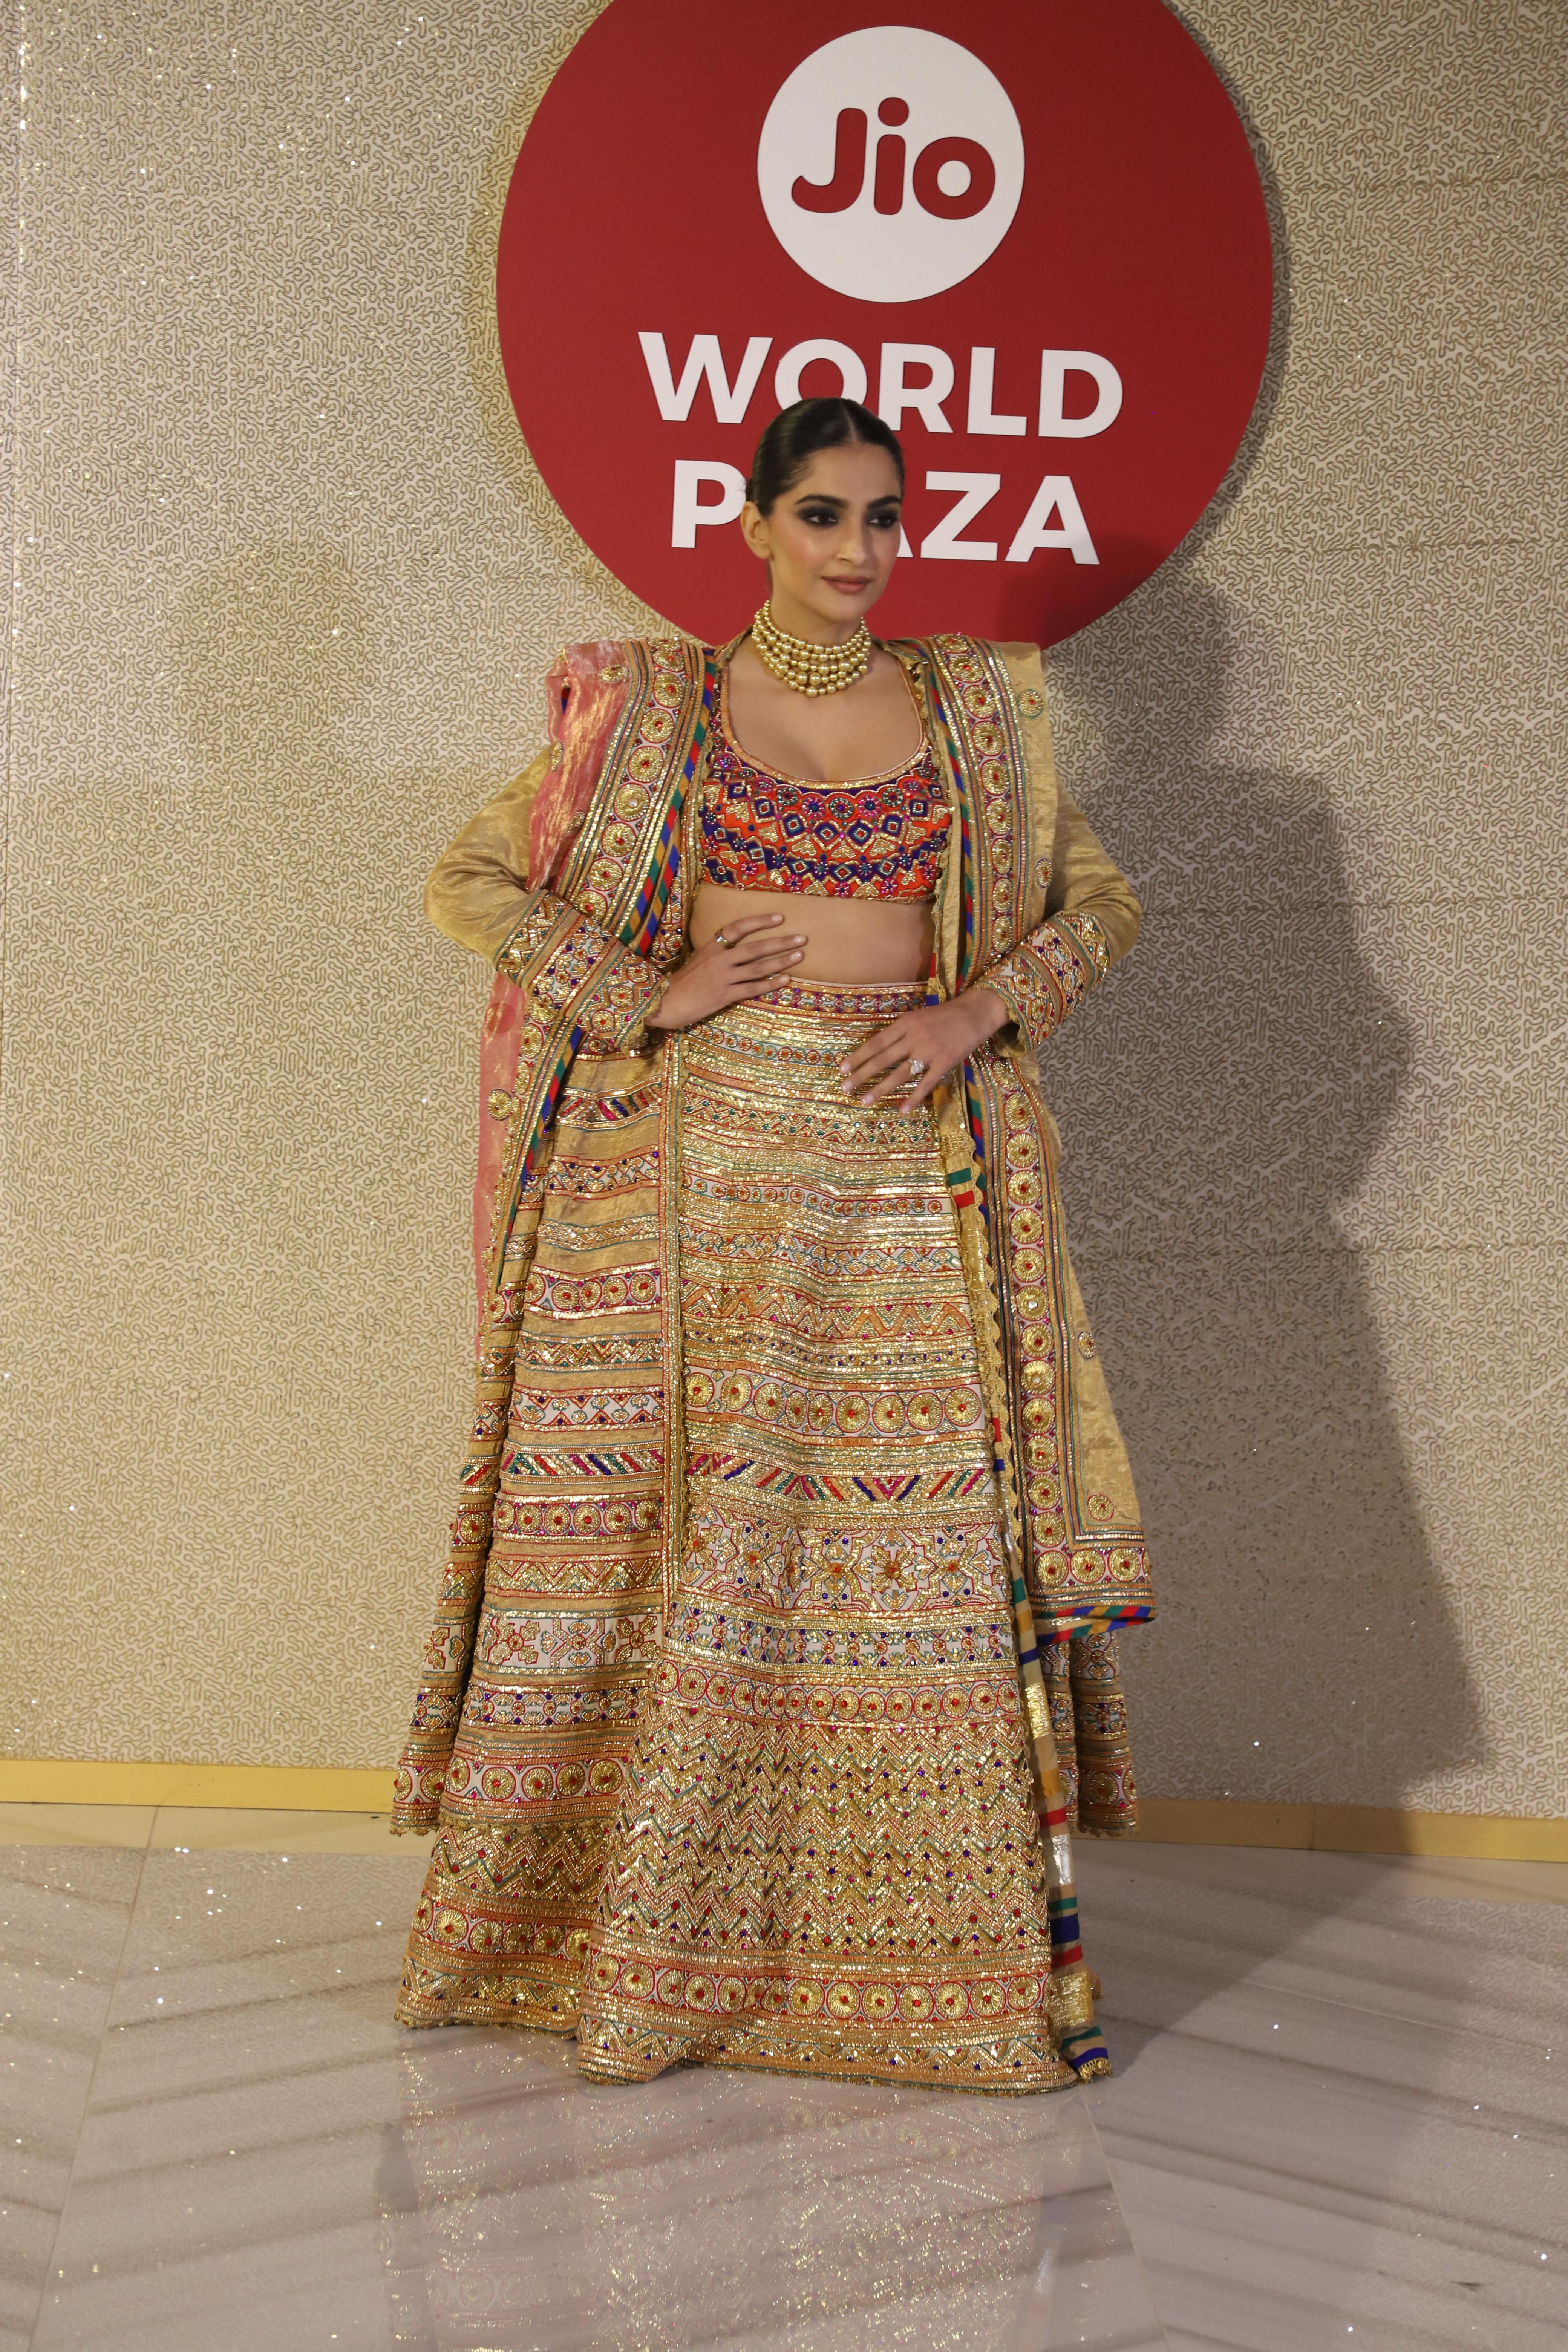 Sonam Kapoor, everyone's favourite fashionista, walked the ramp wrapped in traditional elegance